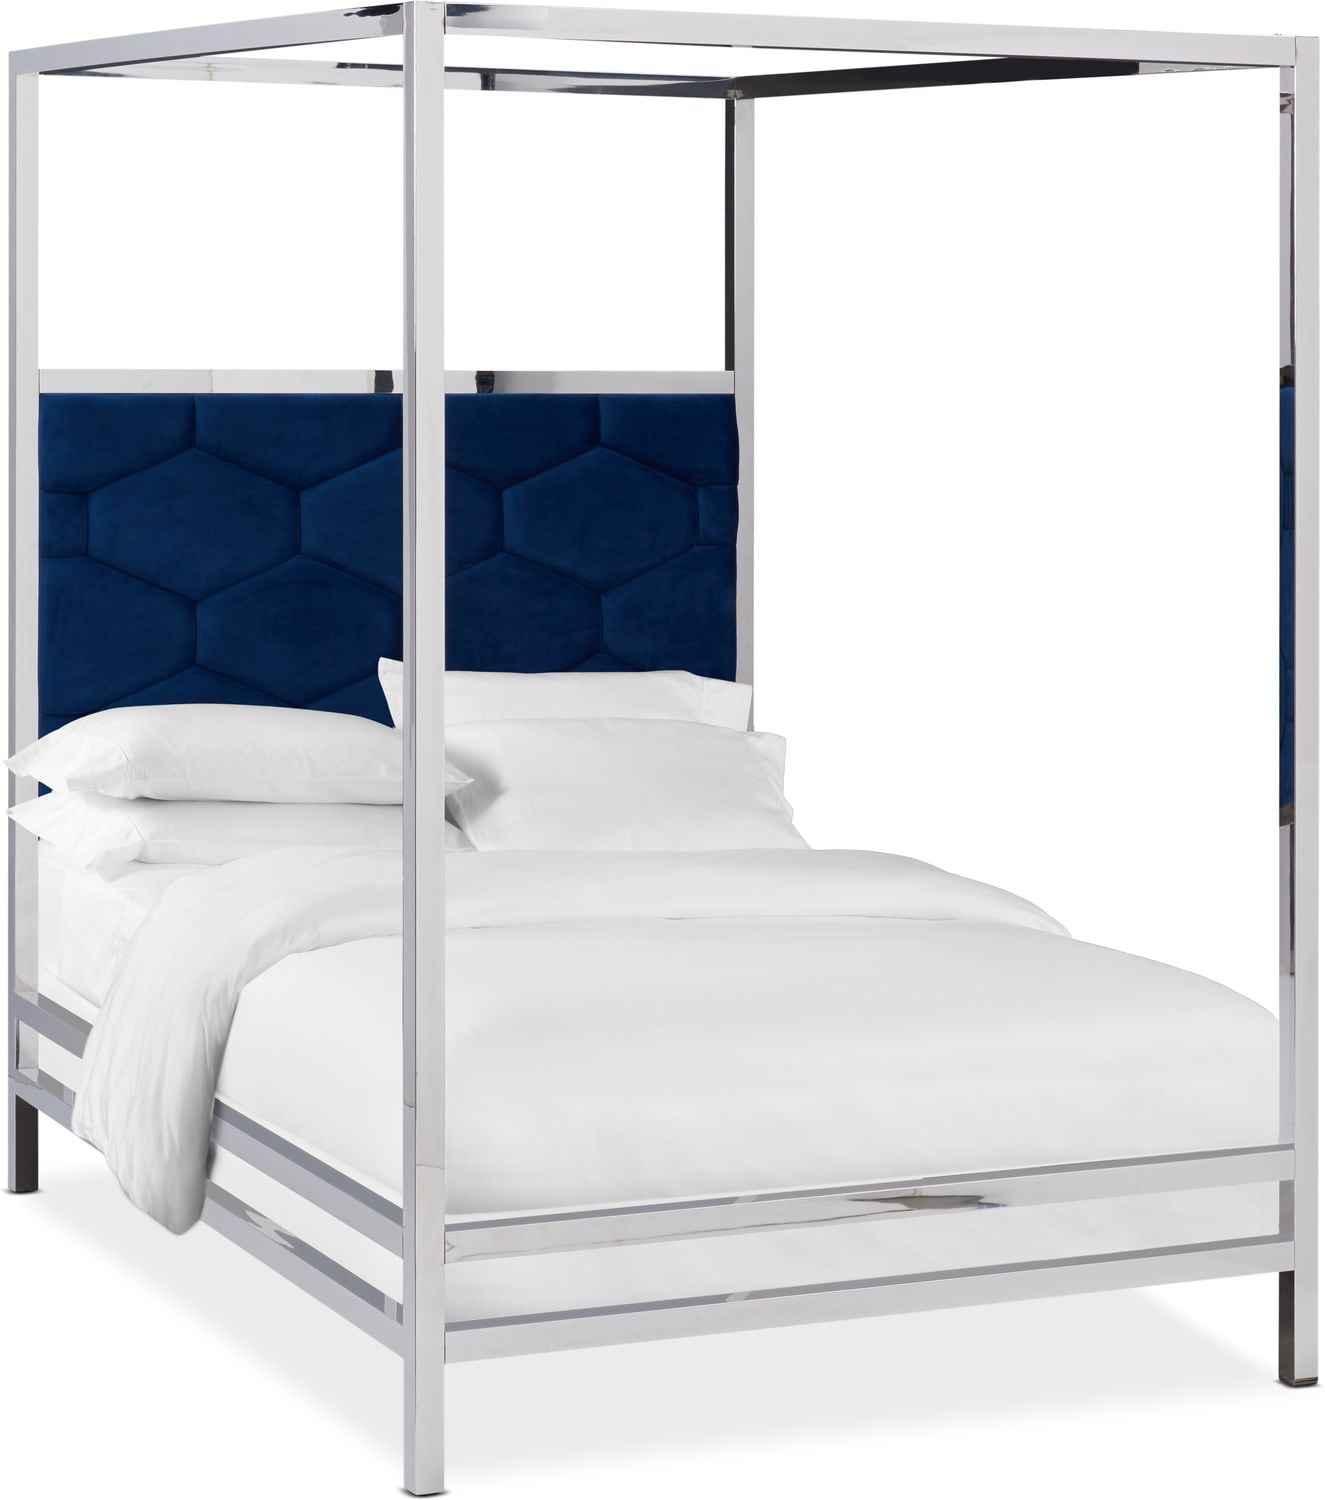 Undefined Value City Furniture, American Signature Bed Frame